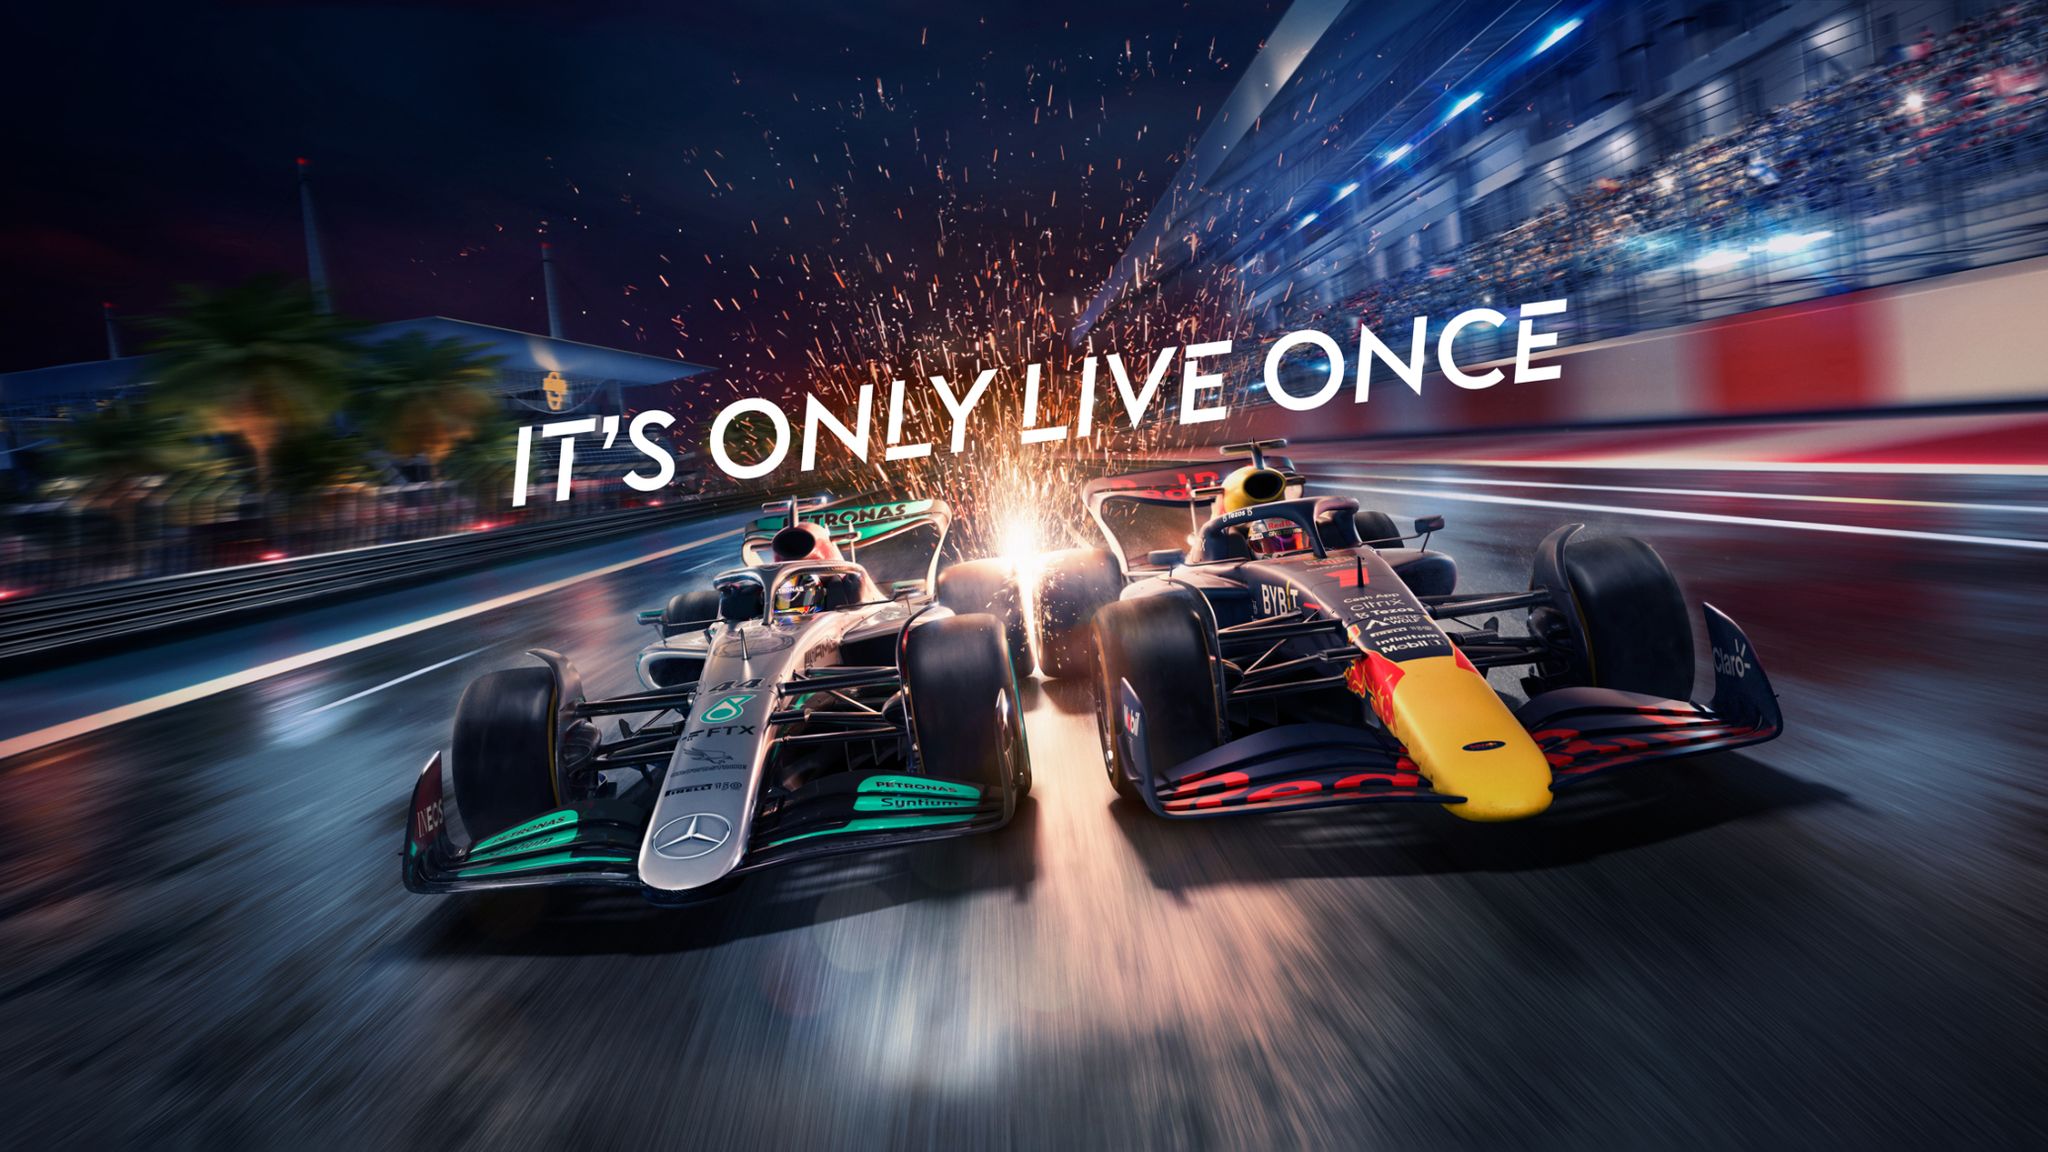 Formula 1 on Sky Sports set to be broadcast in High Dynamic Range (HDR) for the first time in its history F1 News